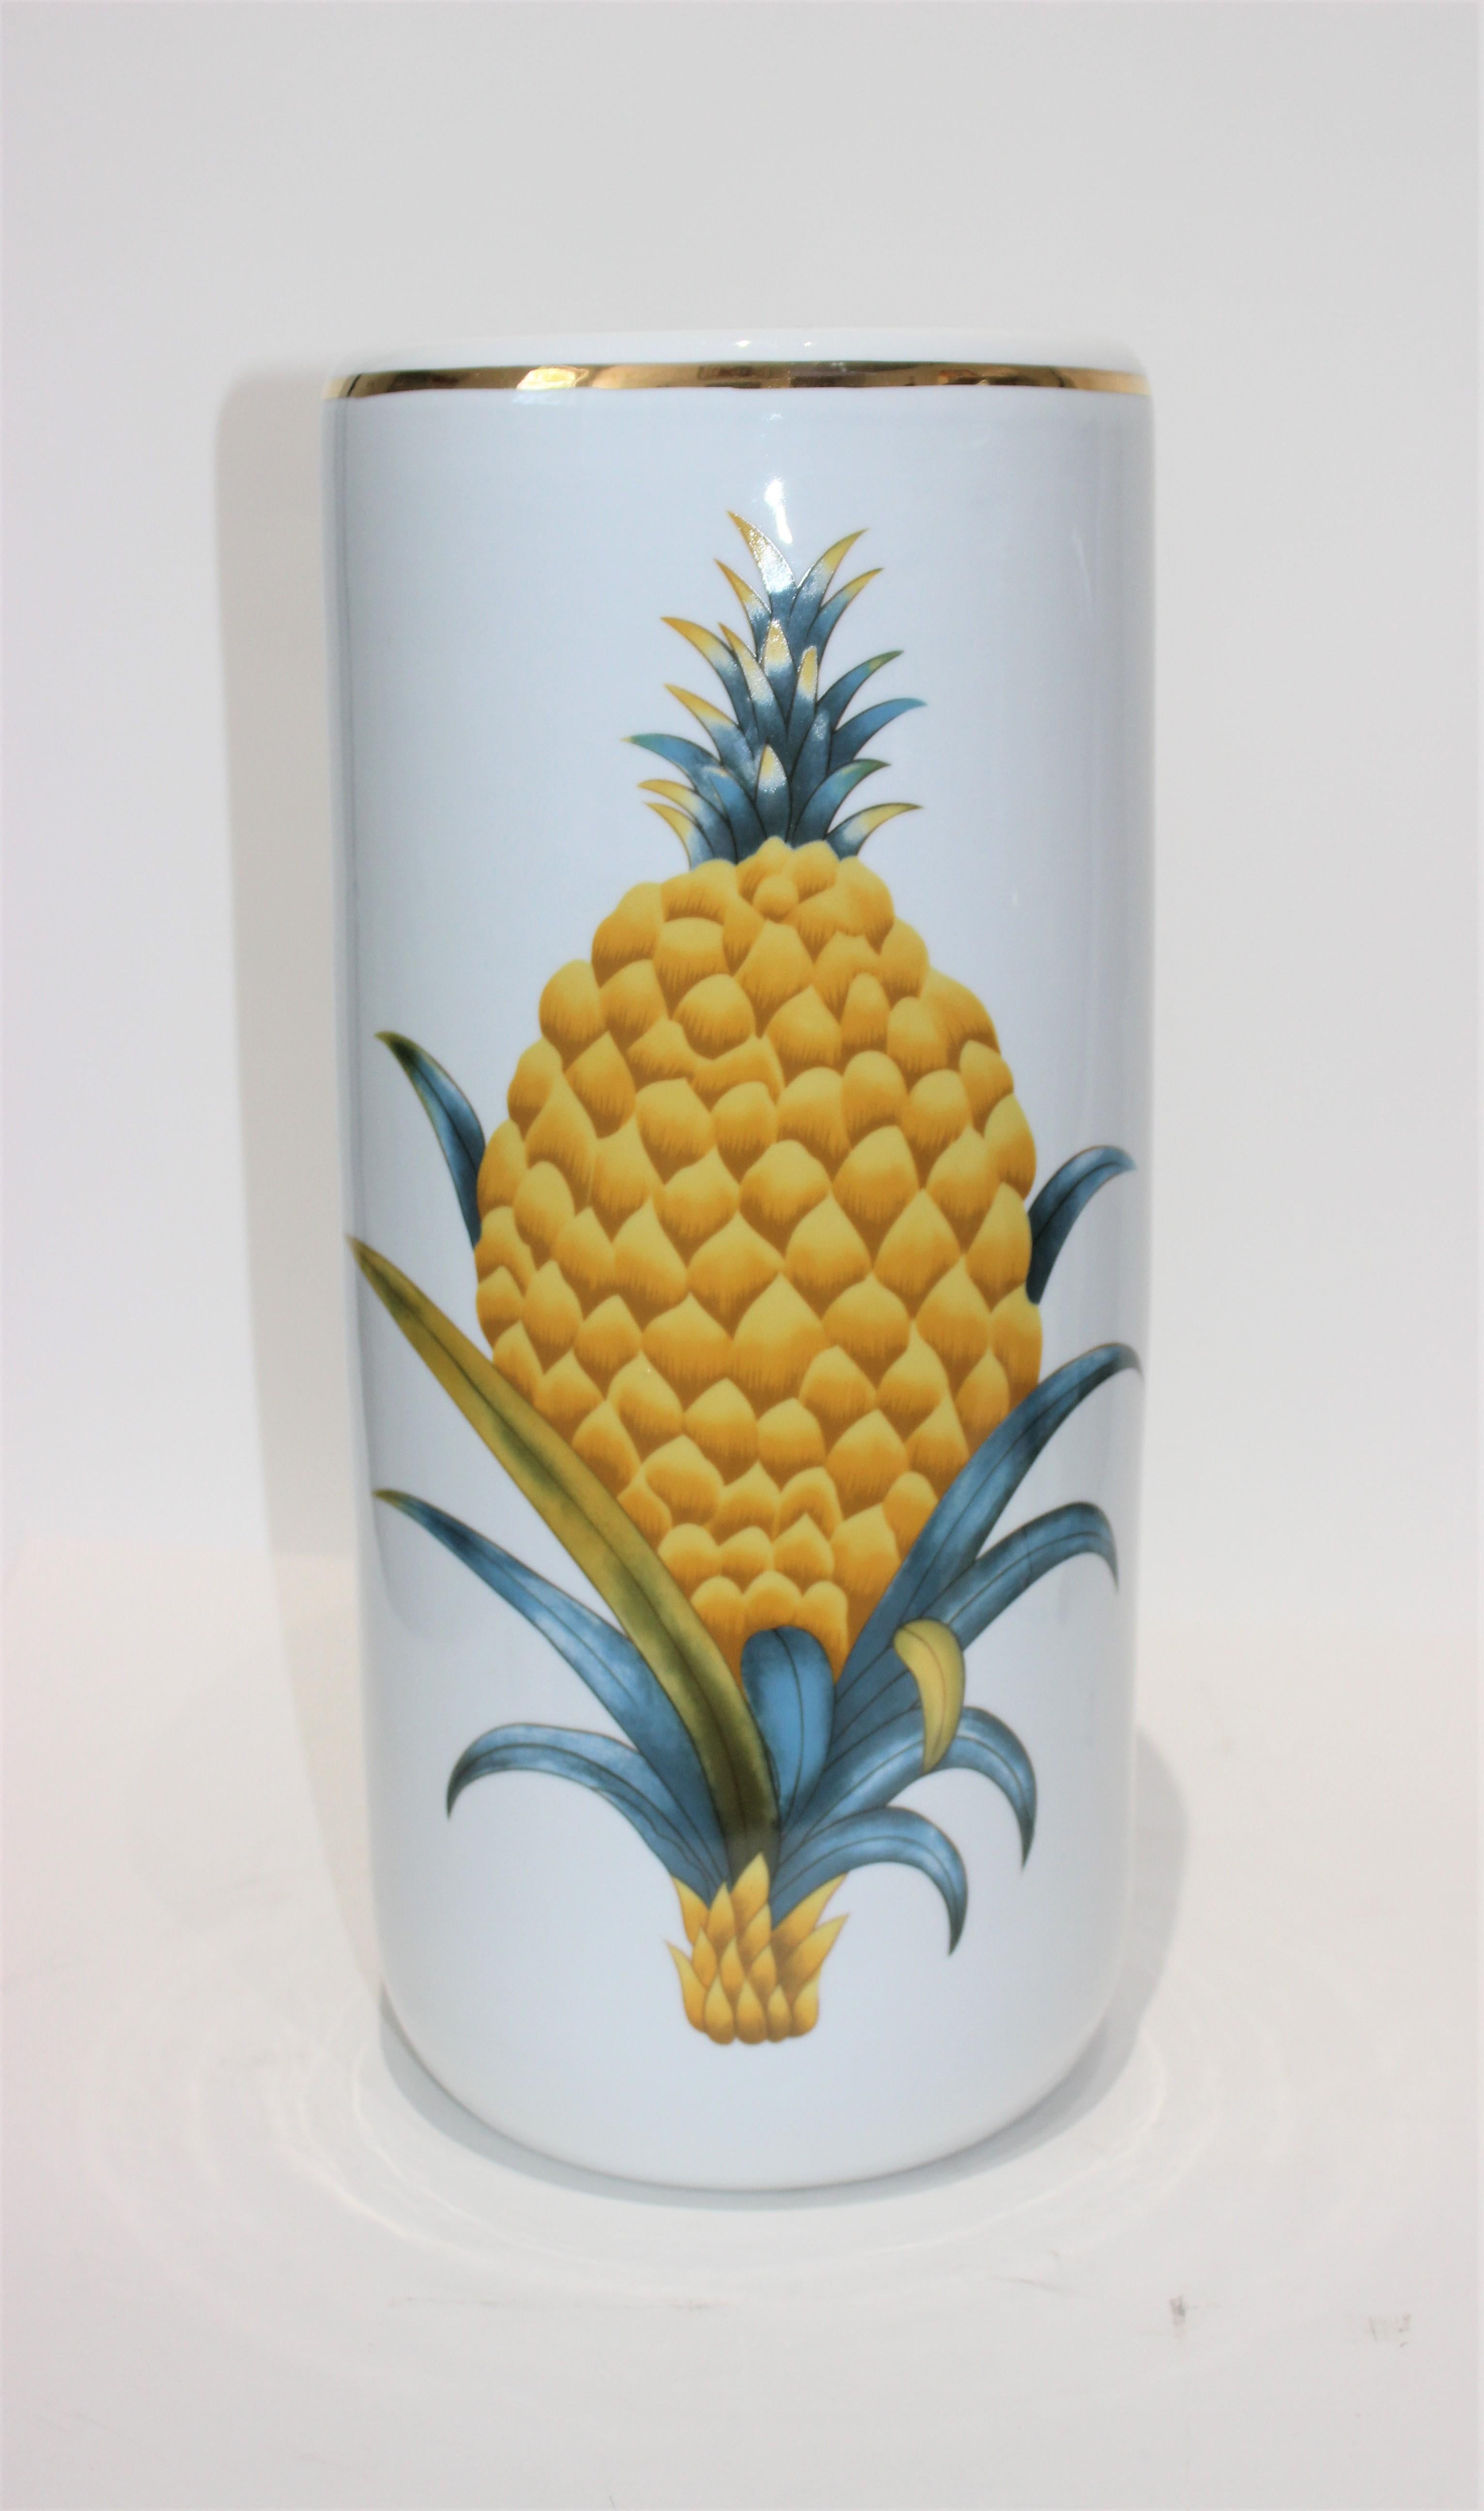 Fornasetti style ceramic painted glazed ceramic midcentury umbrella stand, double pineapple welcoming motif - from Gumps, San Francisco, from a Palm Beach estate - the Gumps logo may be faintly seen on the base

There is a small crack in the gold